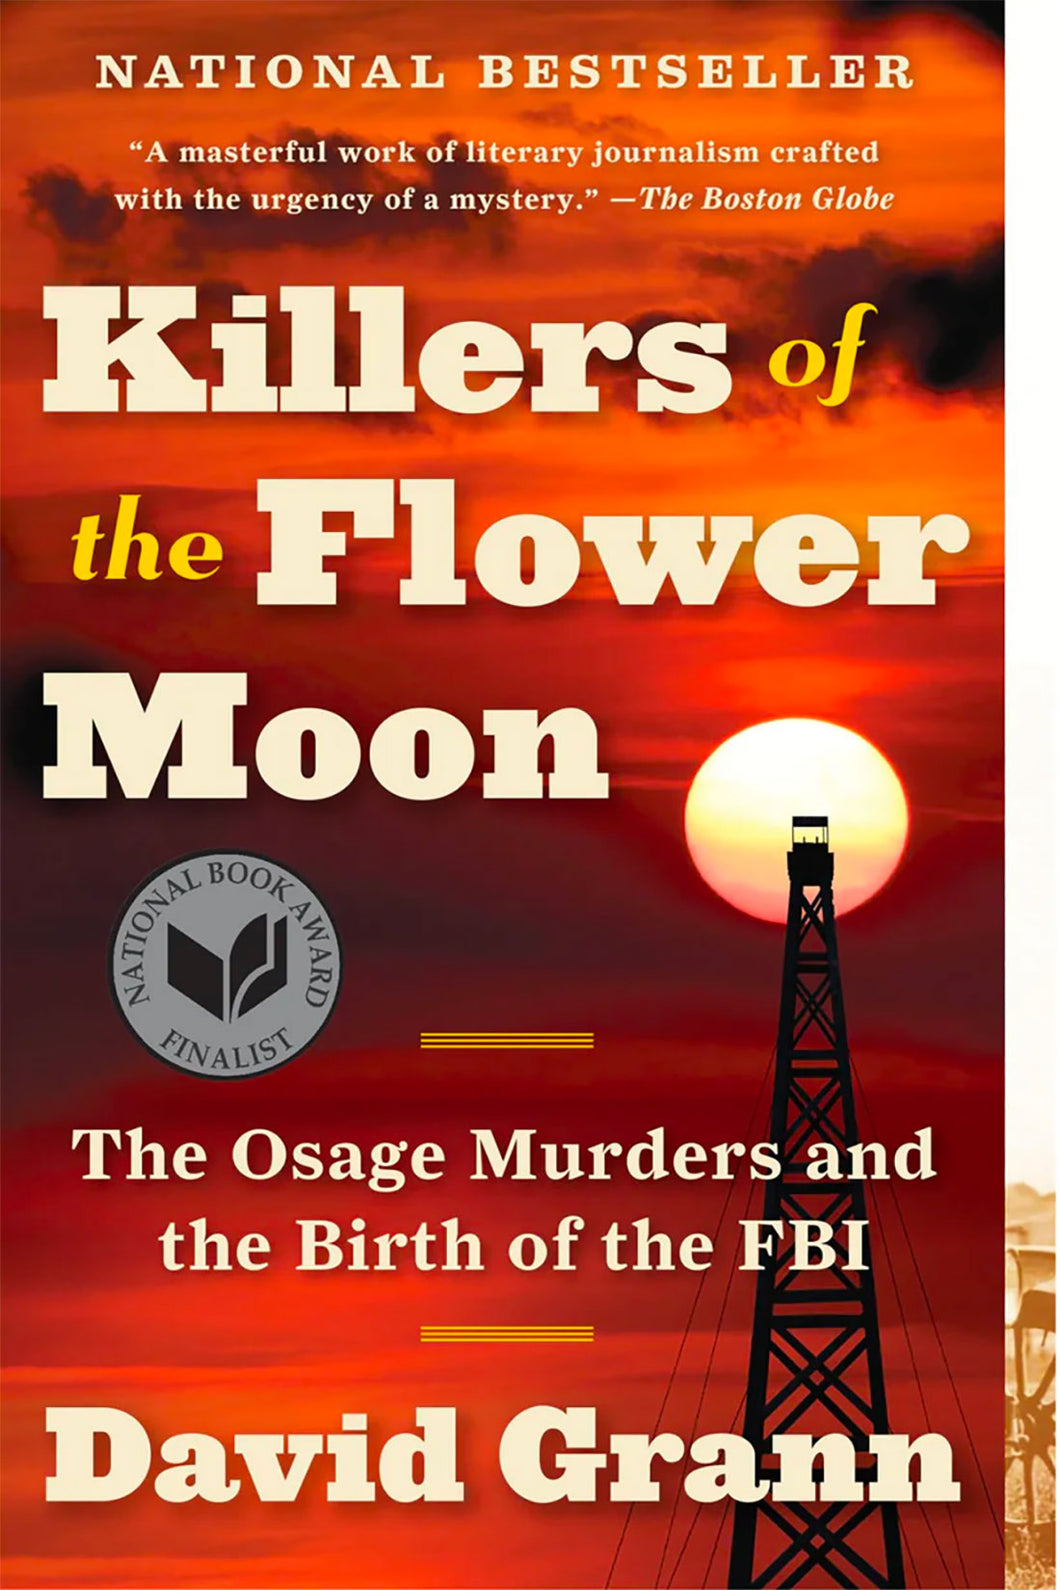 Killers of the Flower Moon: The Osage Murders and the Birth of the FBI by David Grann / BOOK OR BUNDLE - Starting at $17!